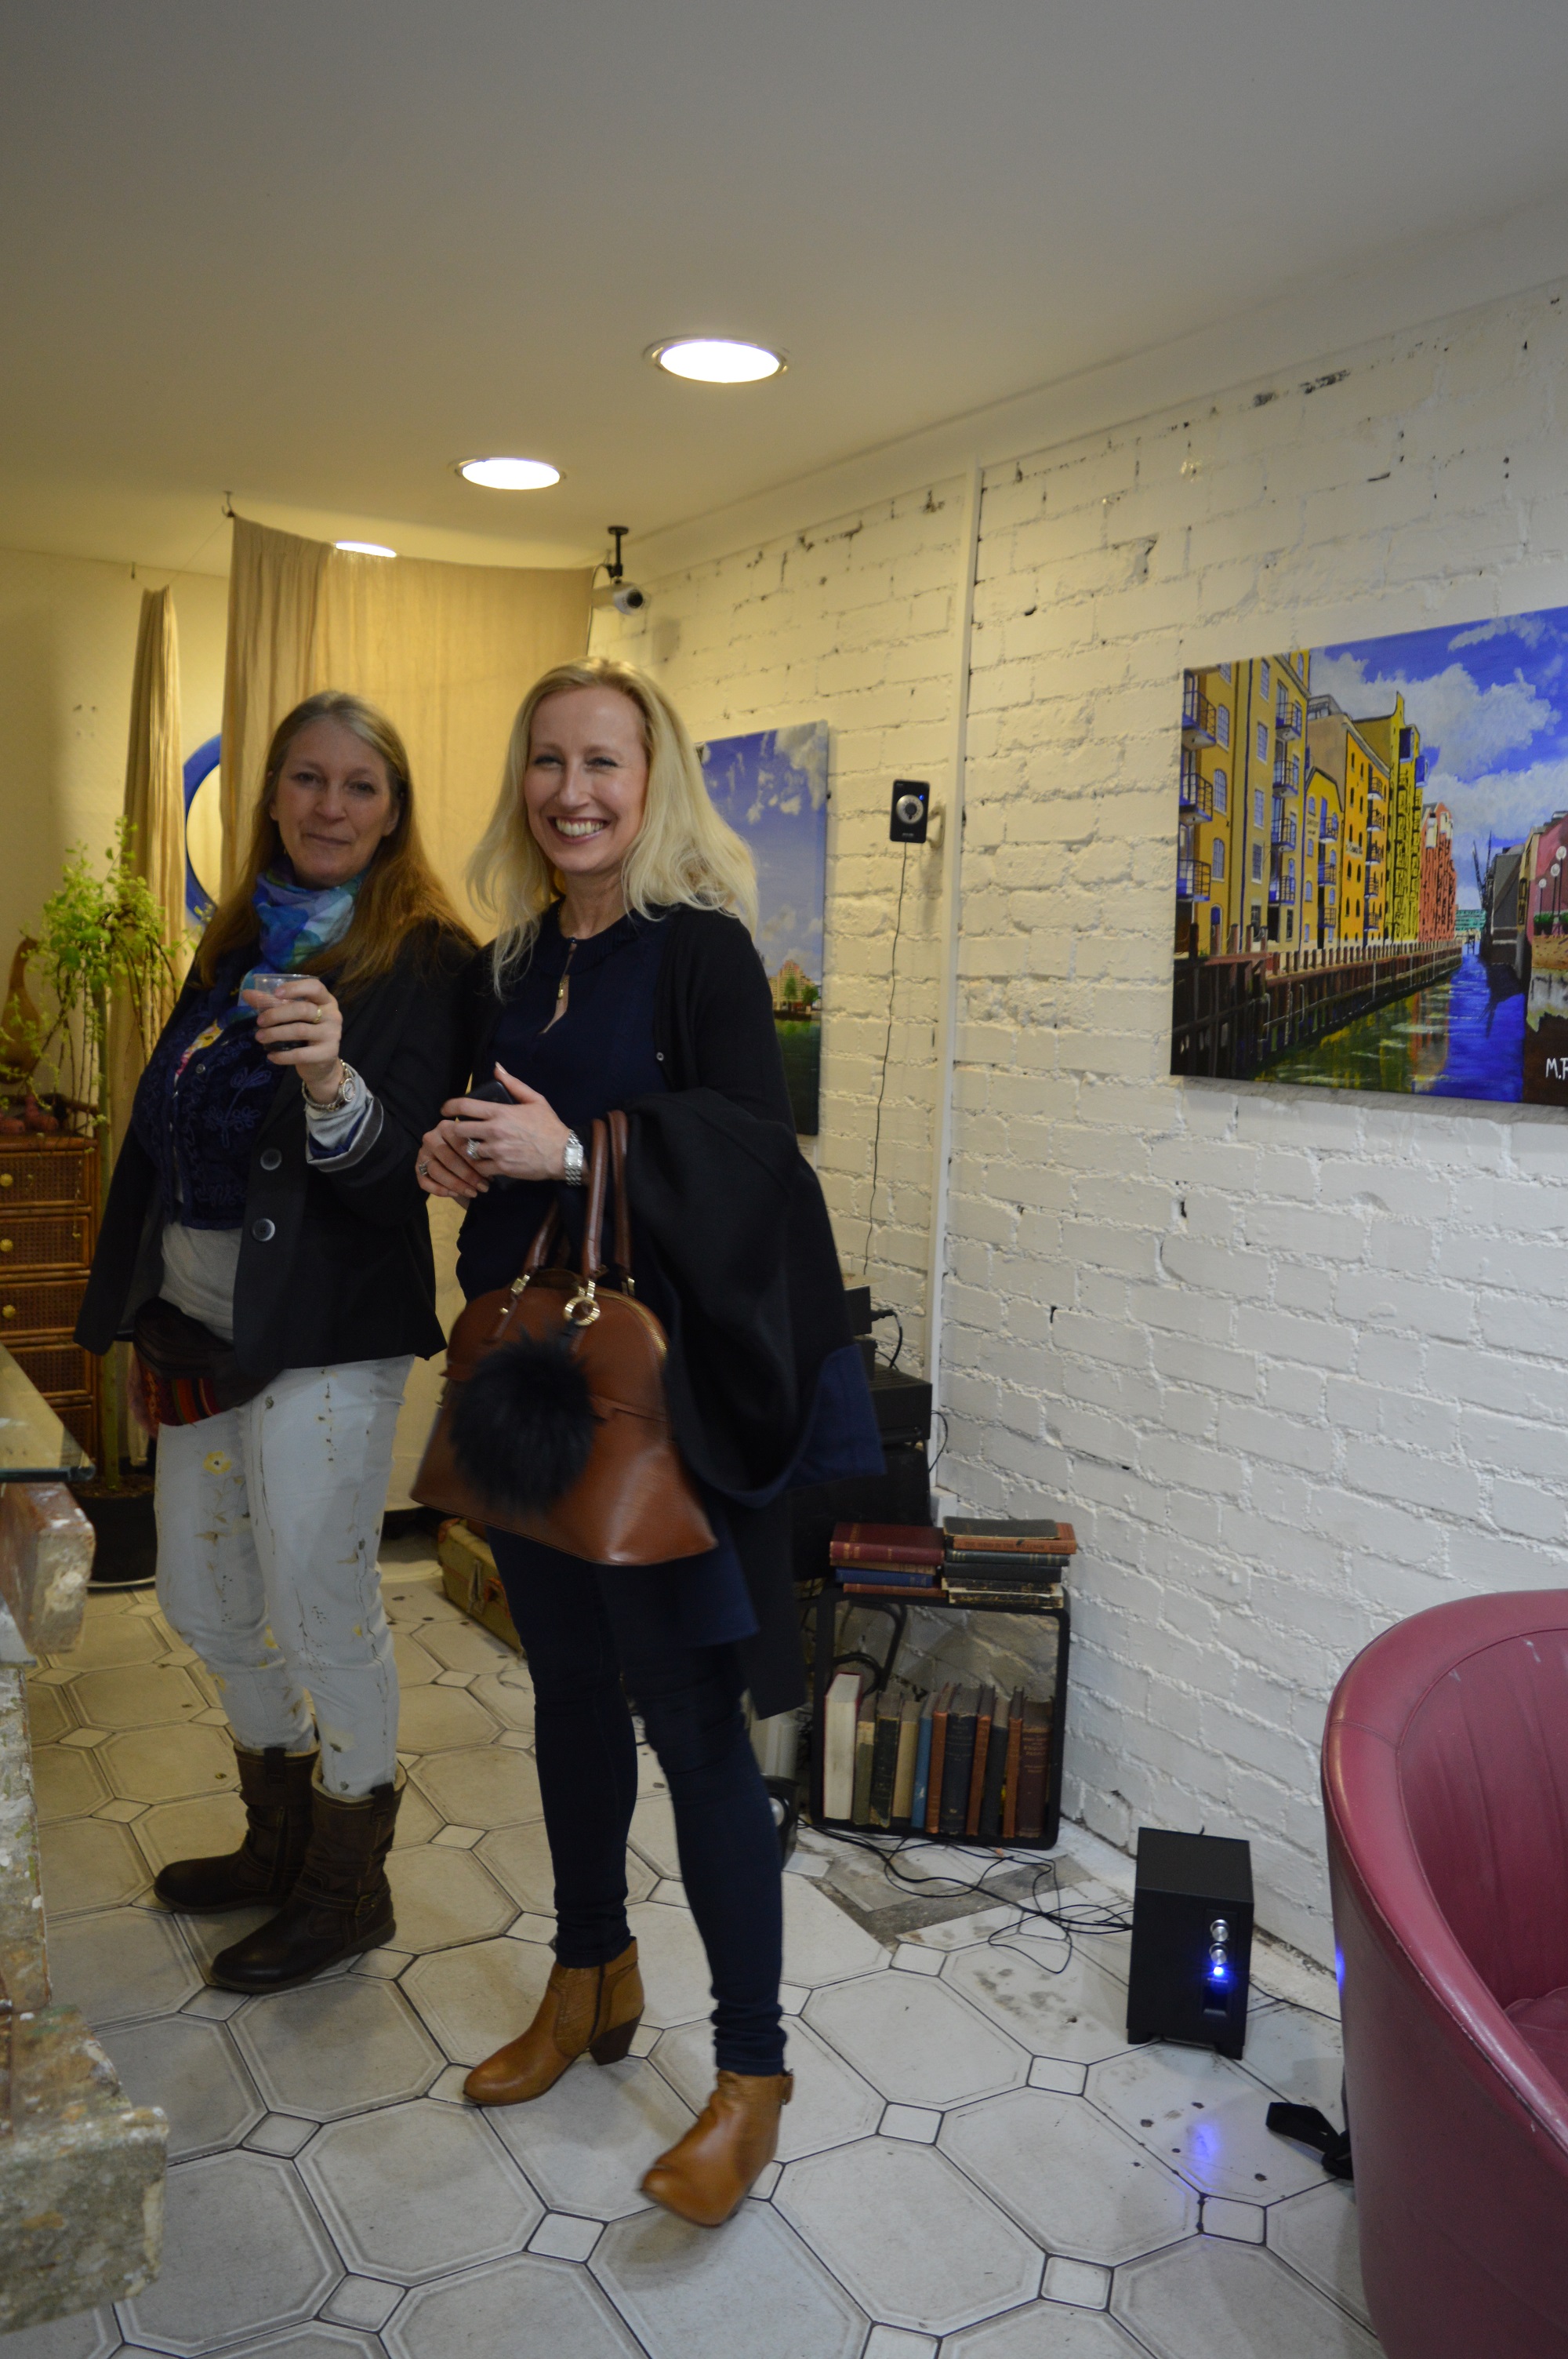 Guests of 504 Gallery | North London